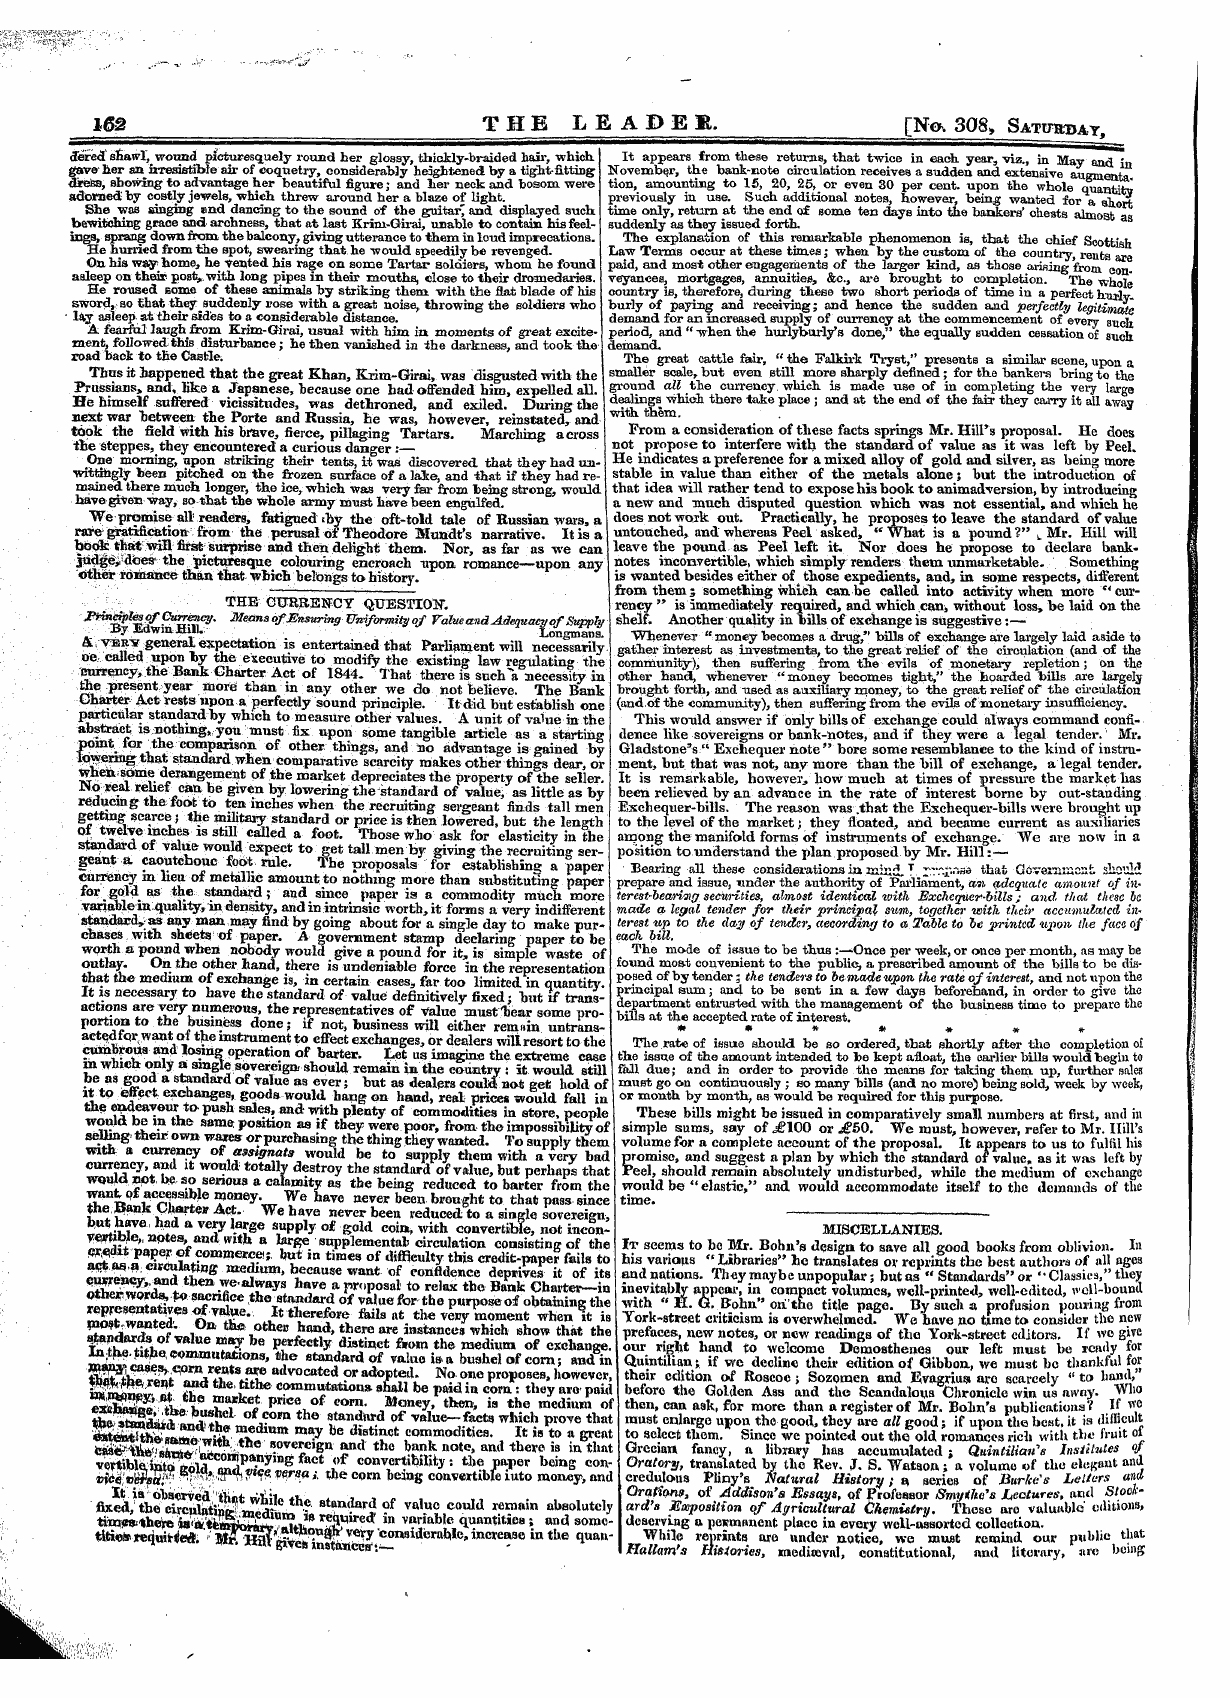 Leader (1850-1860): jS F Y, 1st edition: 18